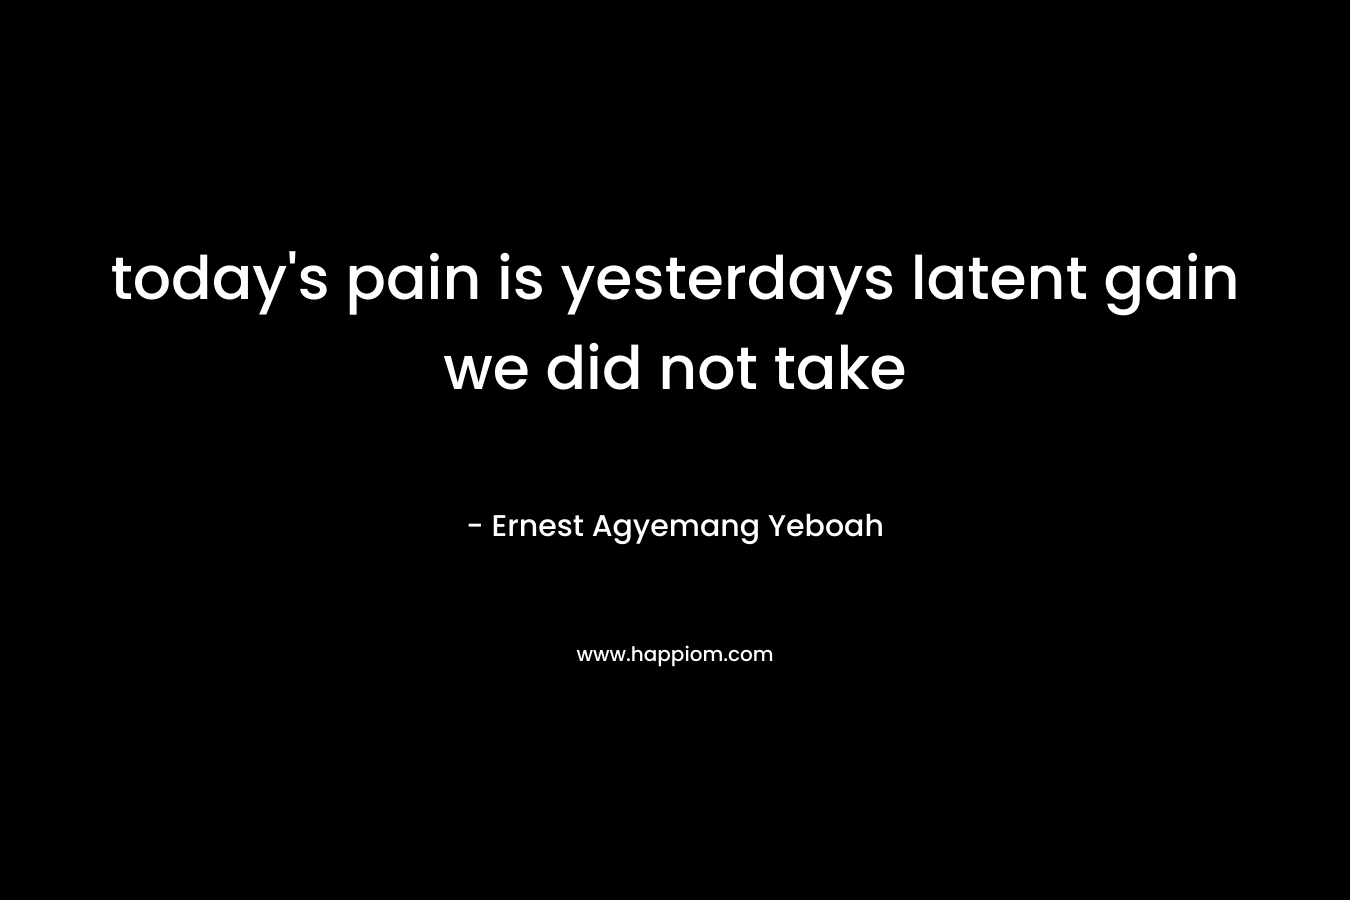 today's pain is yesterdays latent gain we did not take